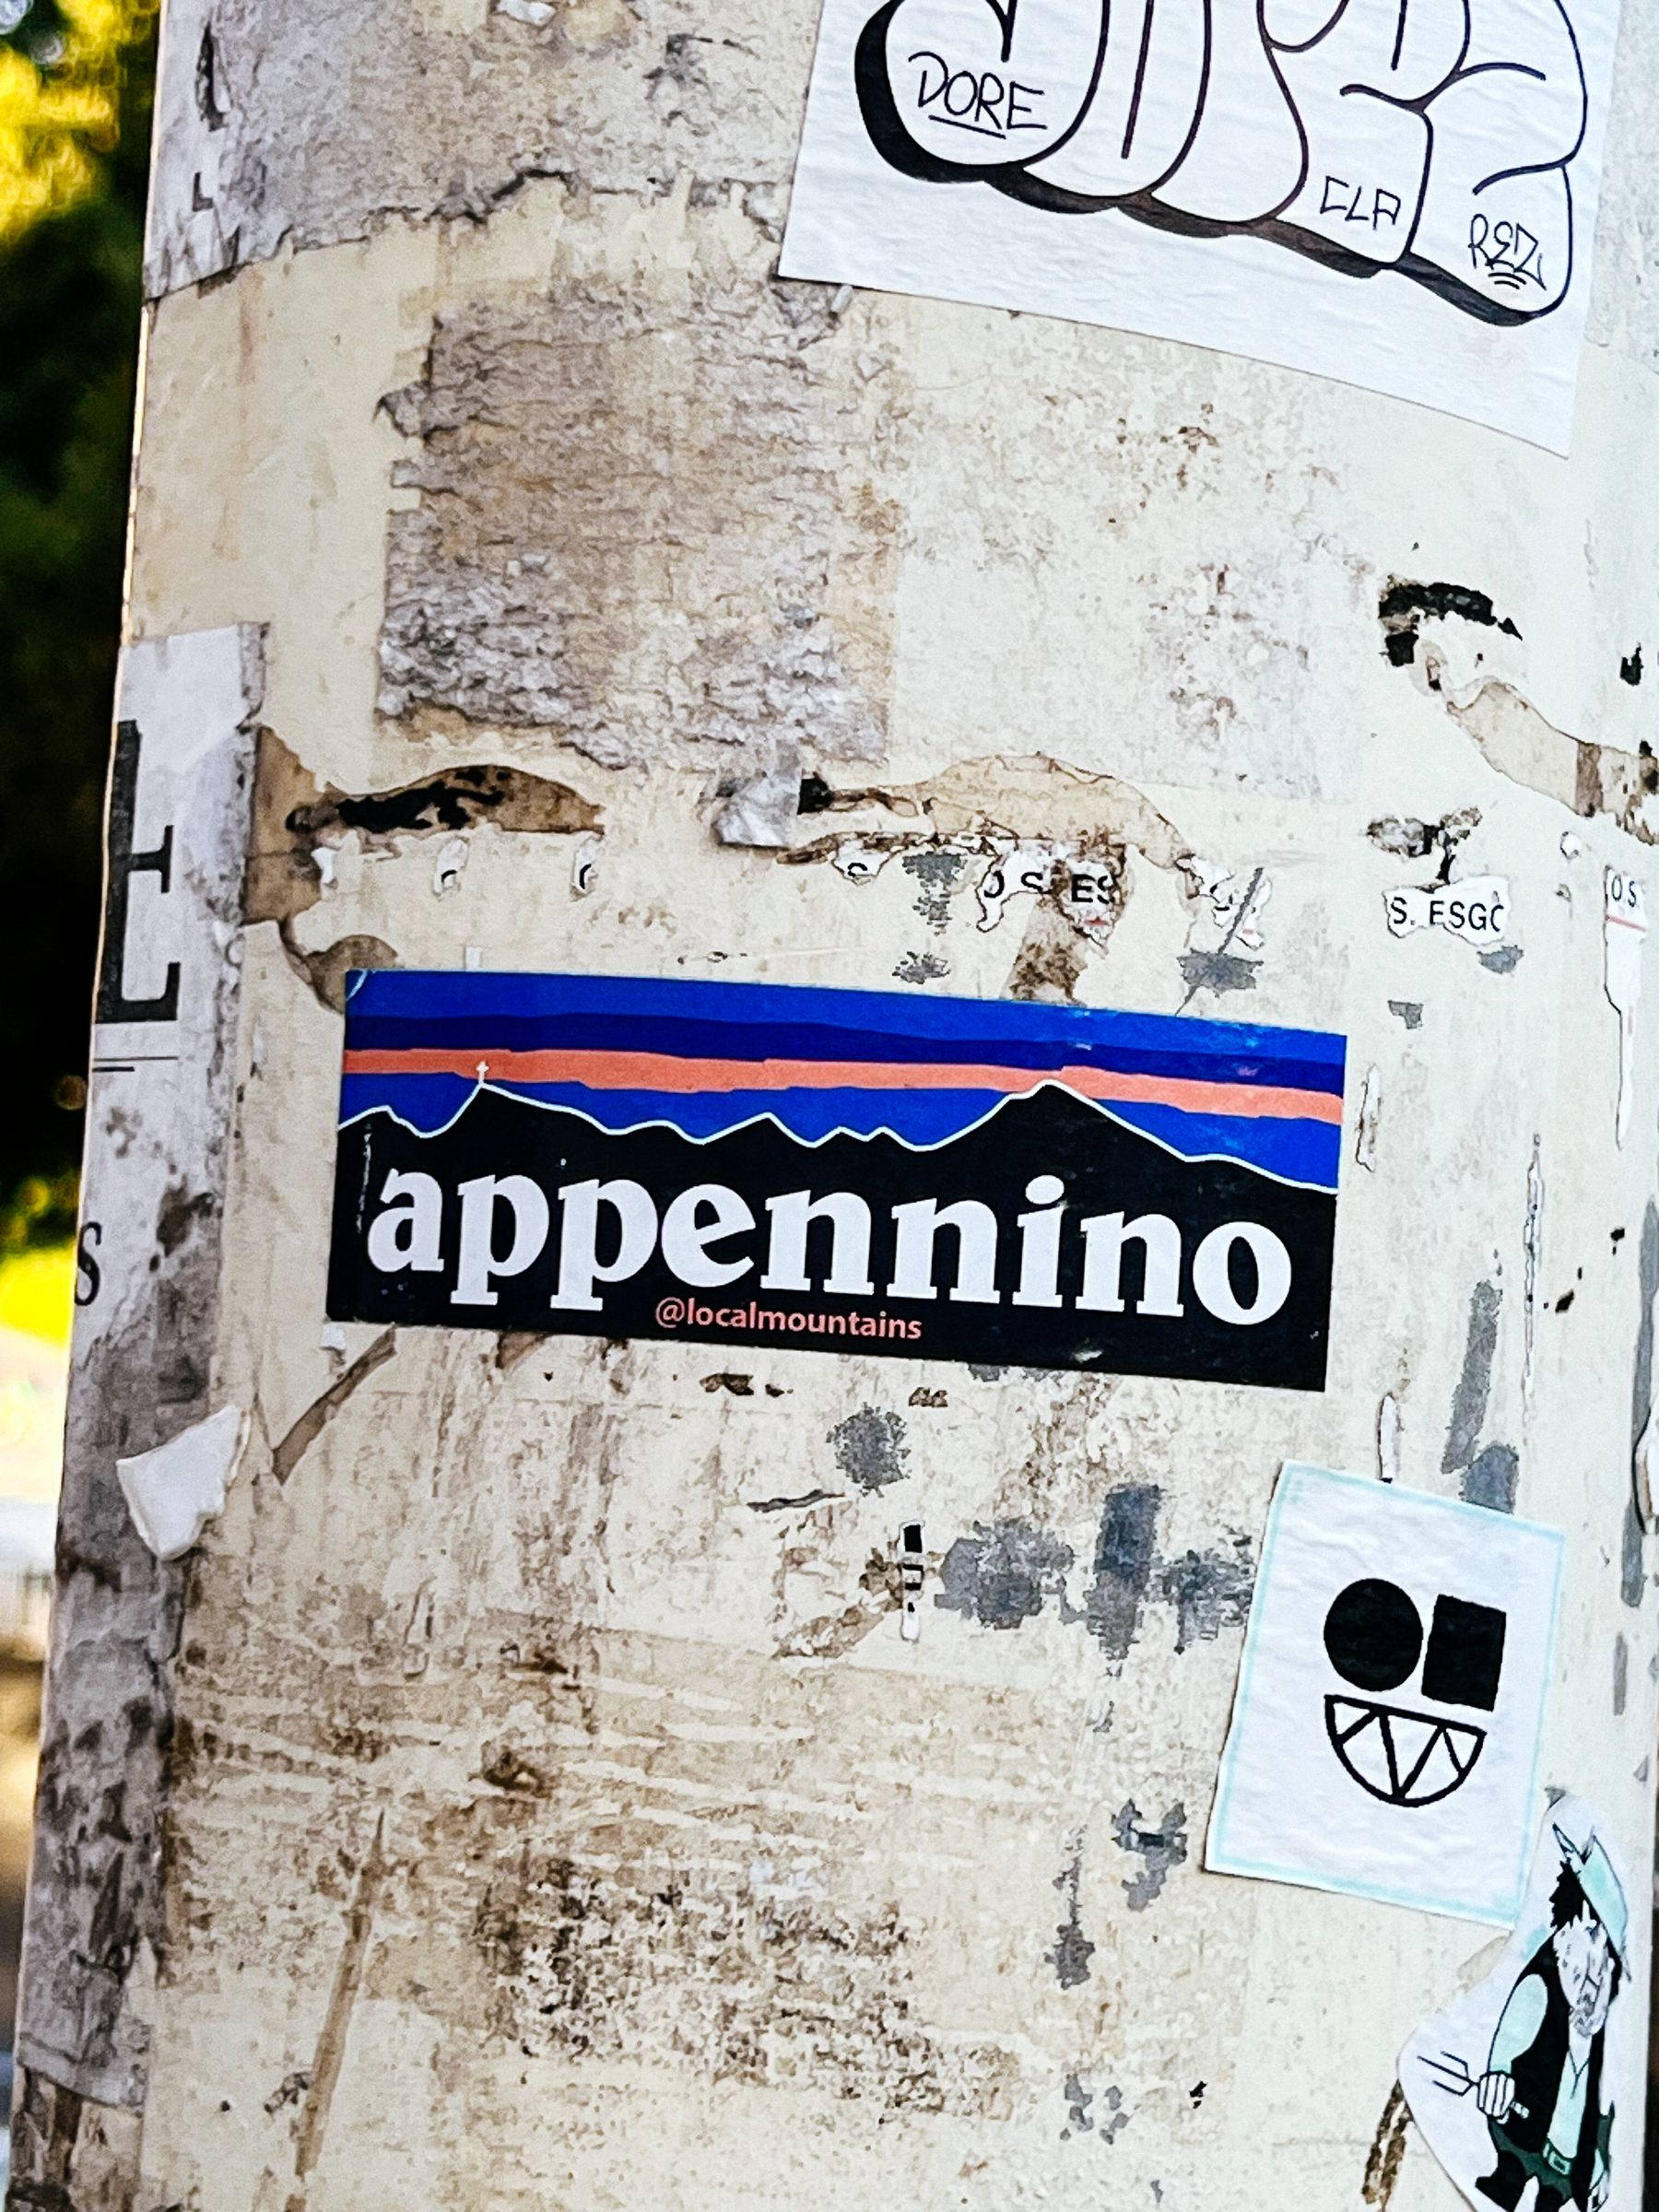 Replica of a Patagonia sticker, with “Appennino” replacing the brand name. 